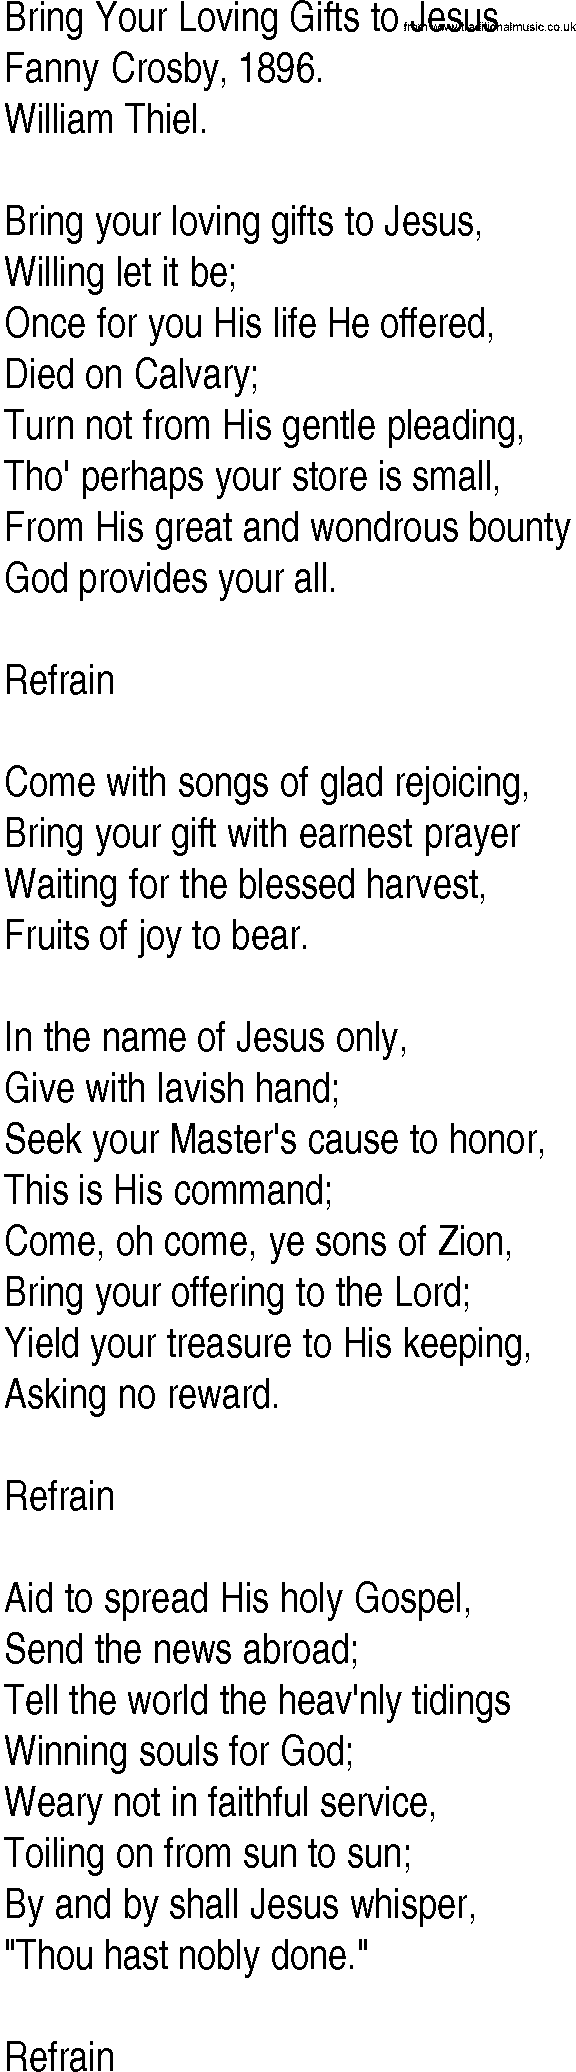 Hymn and Gospel Song: Bring Your Loving Gifts to Jesus by Fanny Crosby lyrics